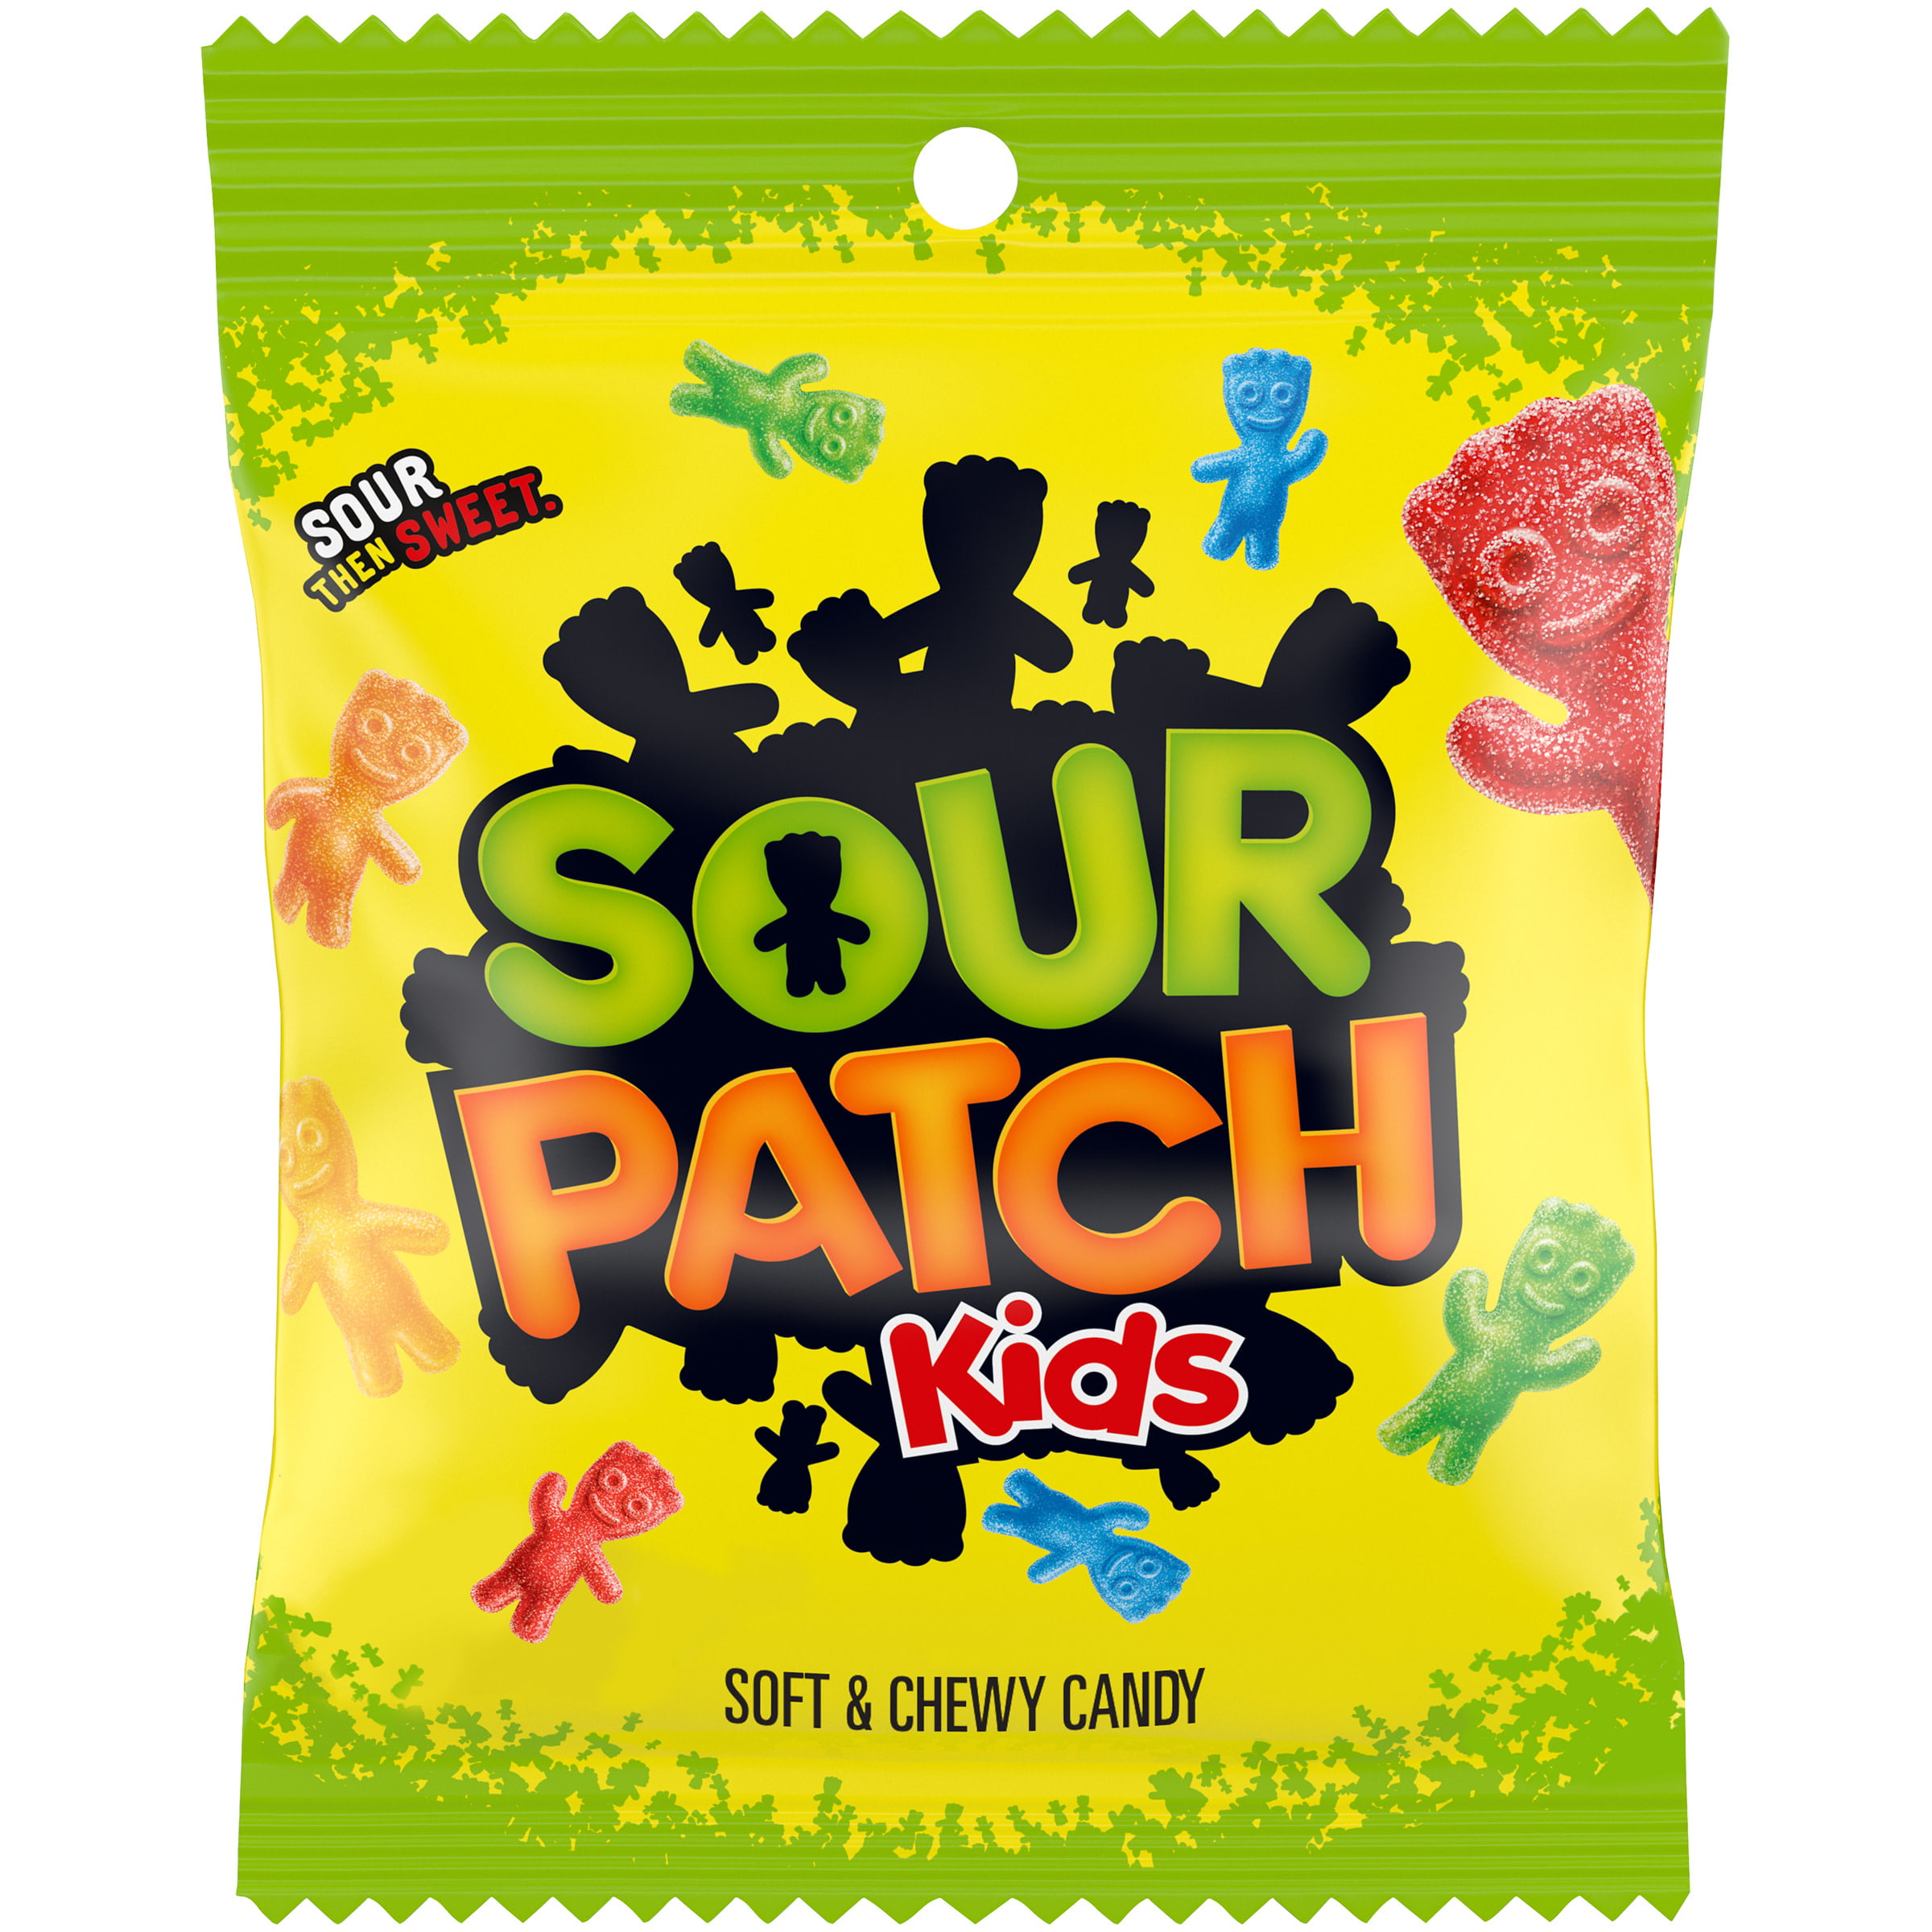 Sour patch kids. Jelibon Sour Patch Kids. Sour Patch Soft and Chewy Candy Kids. Sour Patch мармелад.